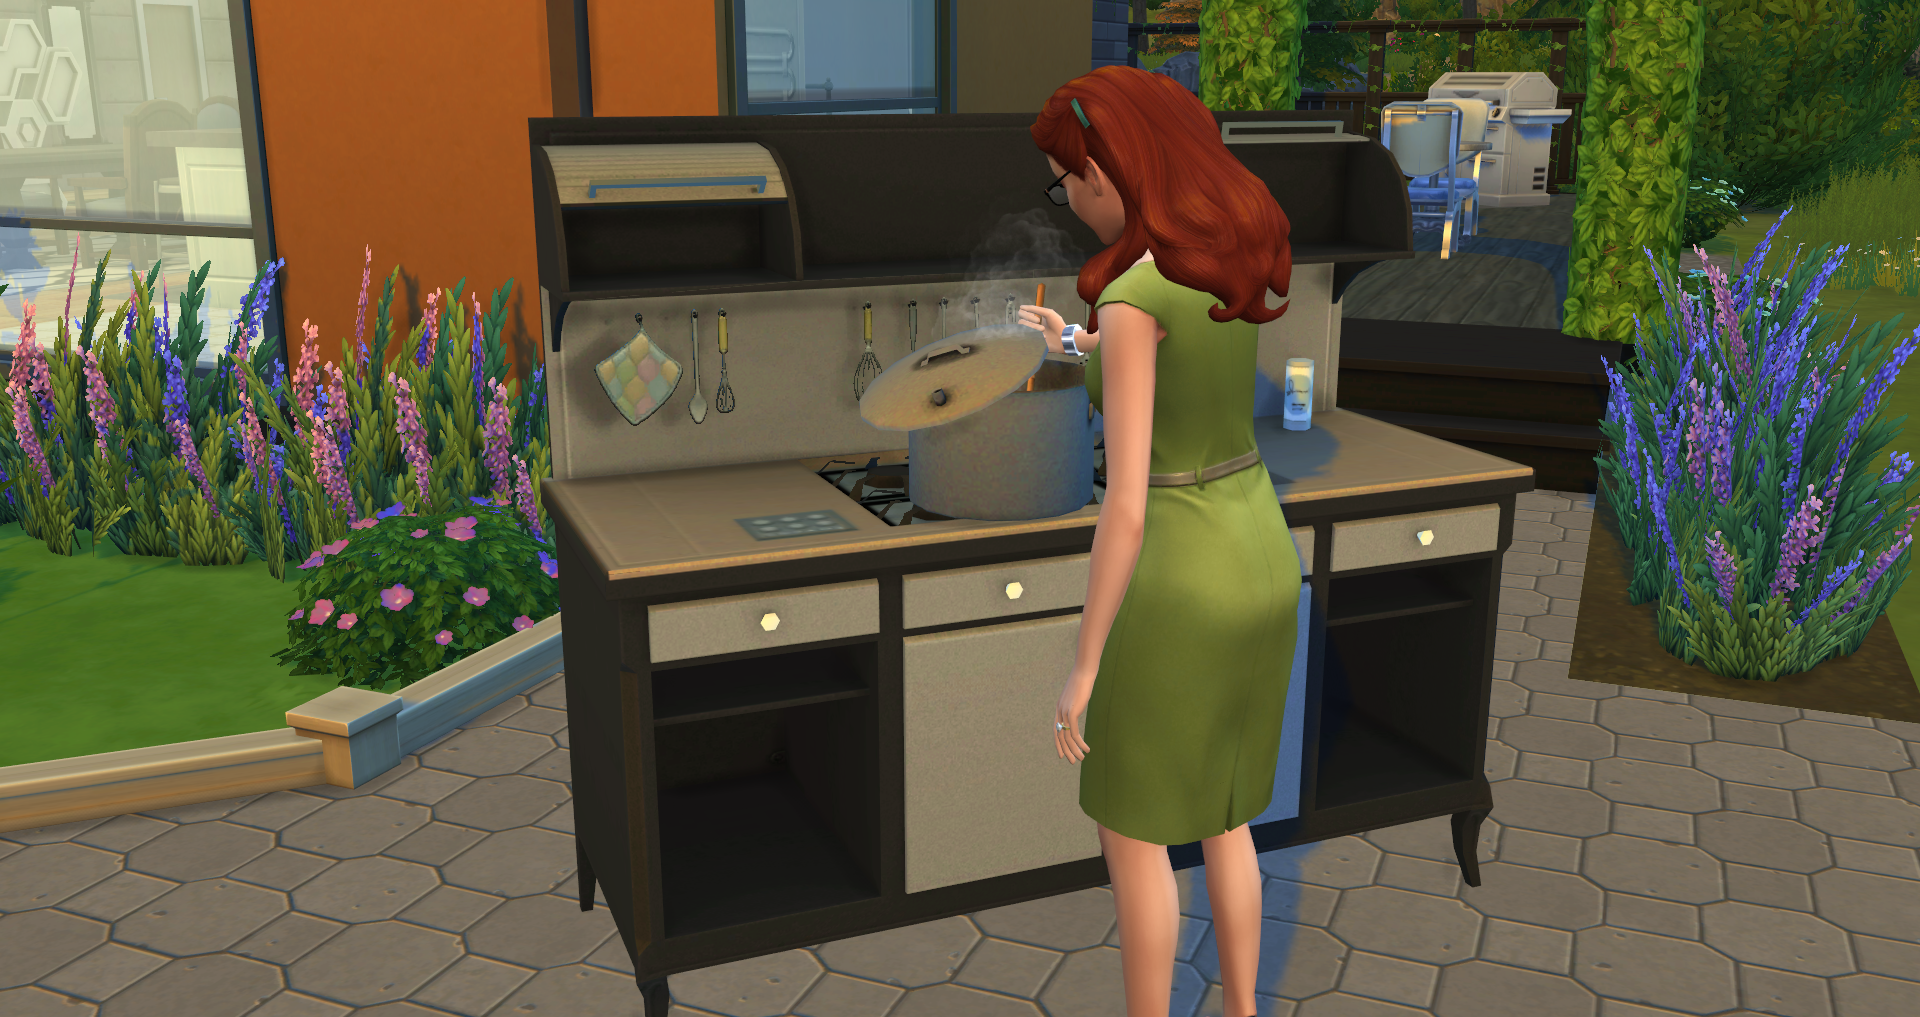 ARTICLES ~ The Sims 4: Functional Canning Station & Canning Skill Mod